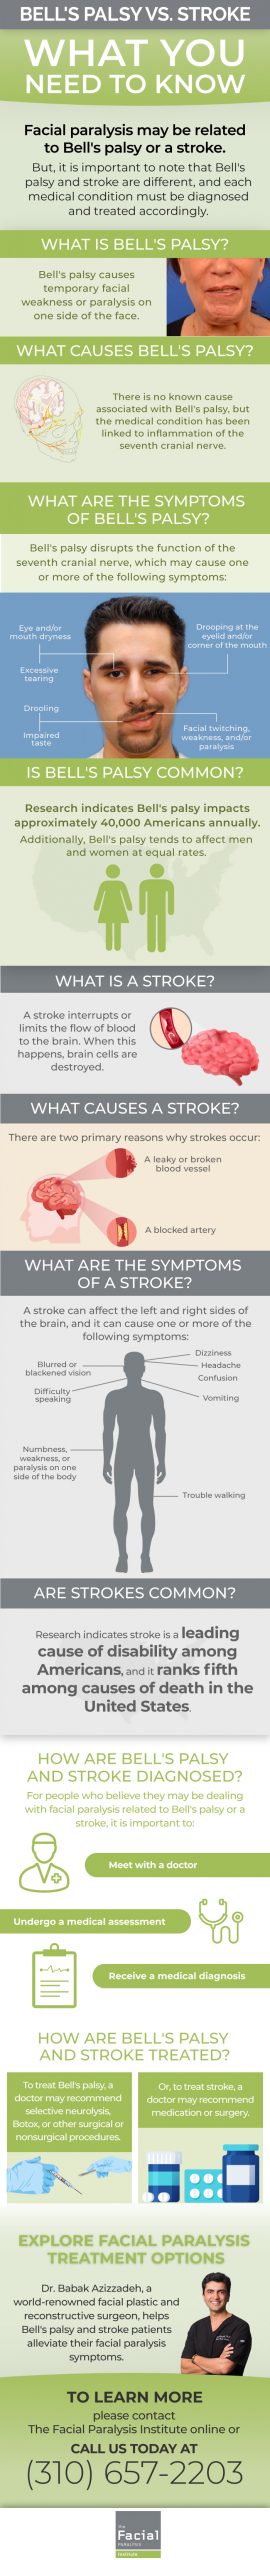 Bells Palsy versus a stroke infographic